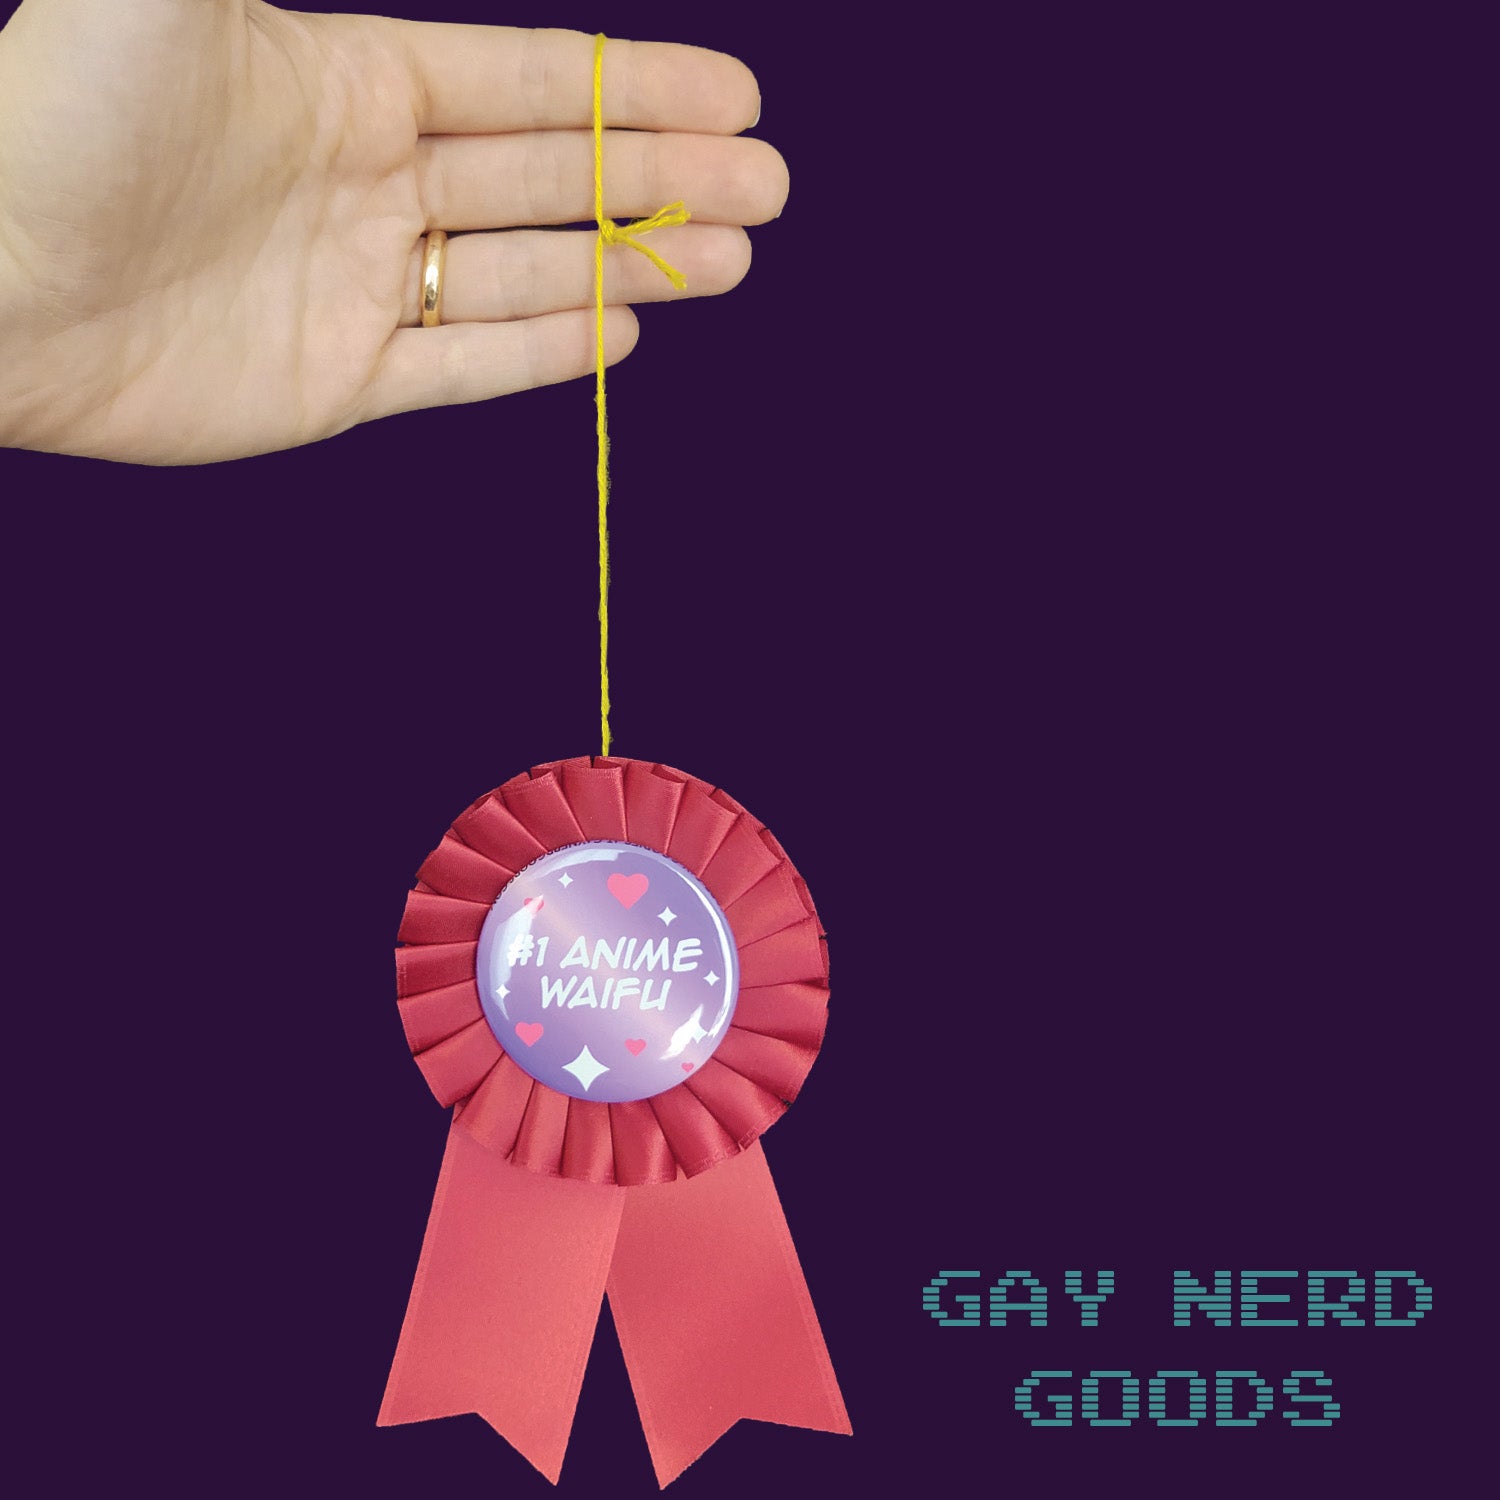 hand holding up the #1 anime waifu award ribbon by the thread against a dark purple background